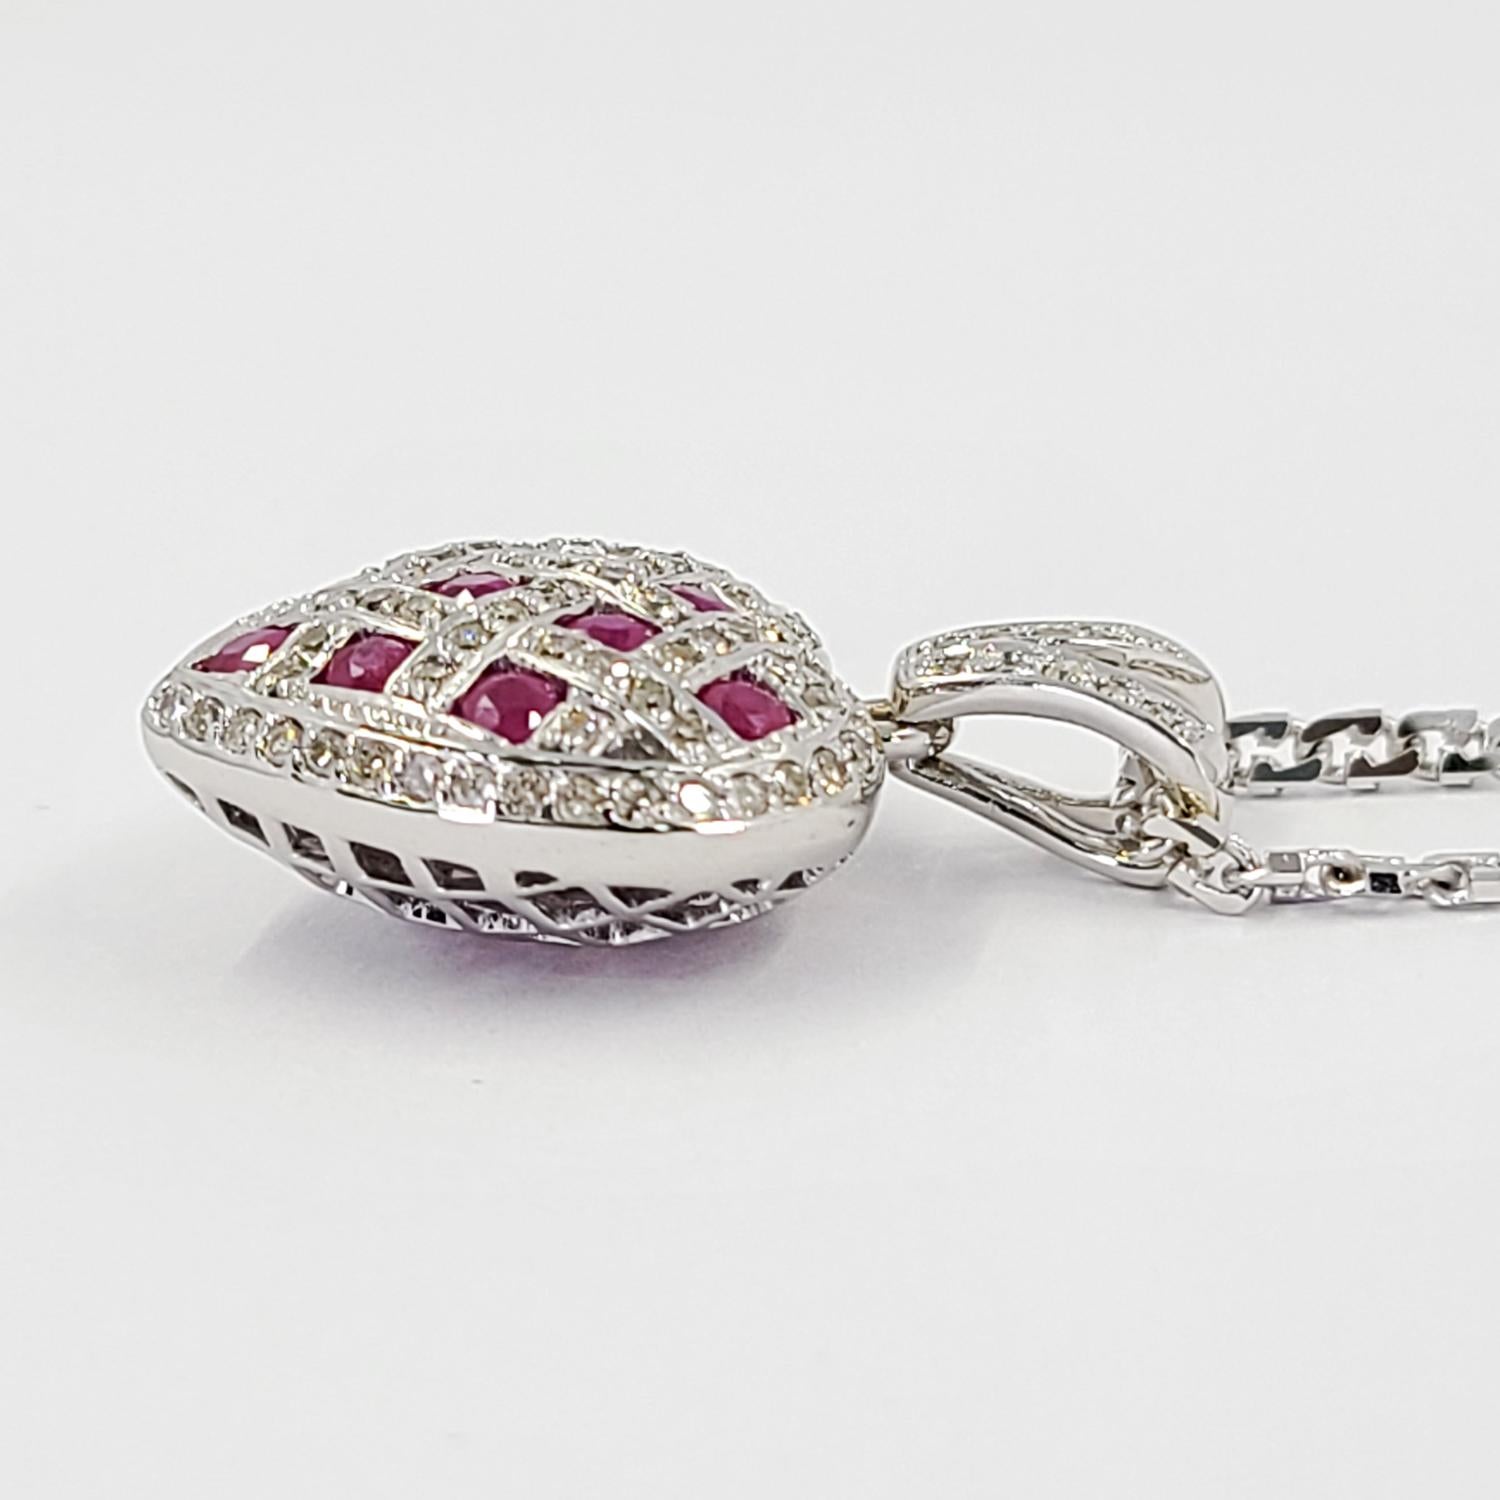 14 Karat White Gold Puff Heart Pendant Featuring 11 Round Rubies Totaling Approx. 1 Carat & 91 Single Cut Diamonds Of I1 Clarity & J Color Totaling 0.45 Carats. Finished Weight Is 5.8 Grams. Chain not included.